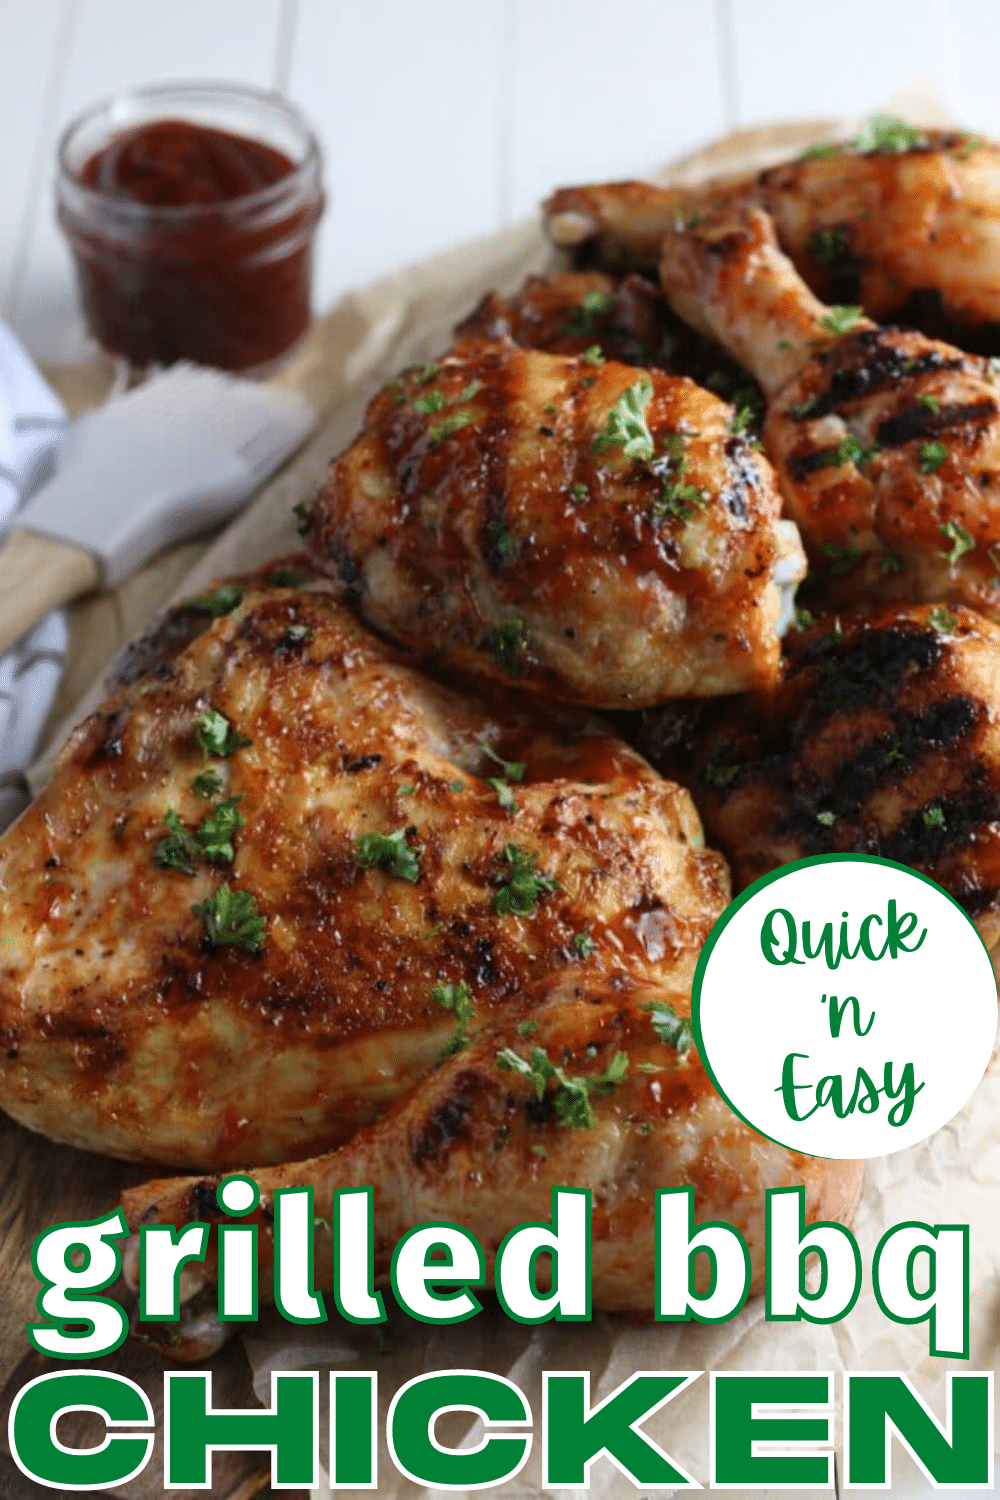 This Easy Grilled BBQ Chicken is the perfect recipe for gearing up for warmer weather. Made with just 4 simple ingredients! #chickenrecipe #grilledchicken #BBQchicken #summer via @wondermomwannab